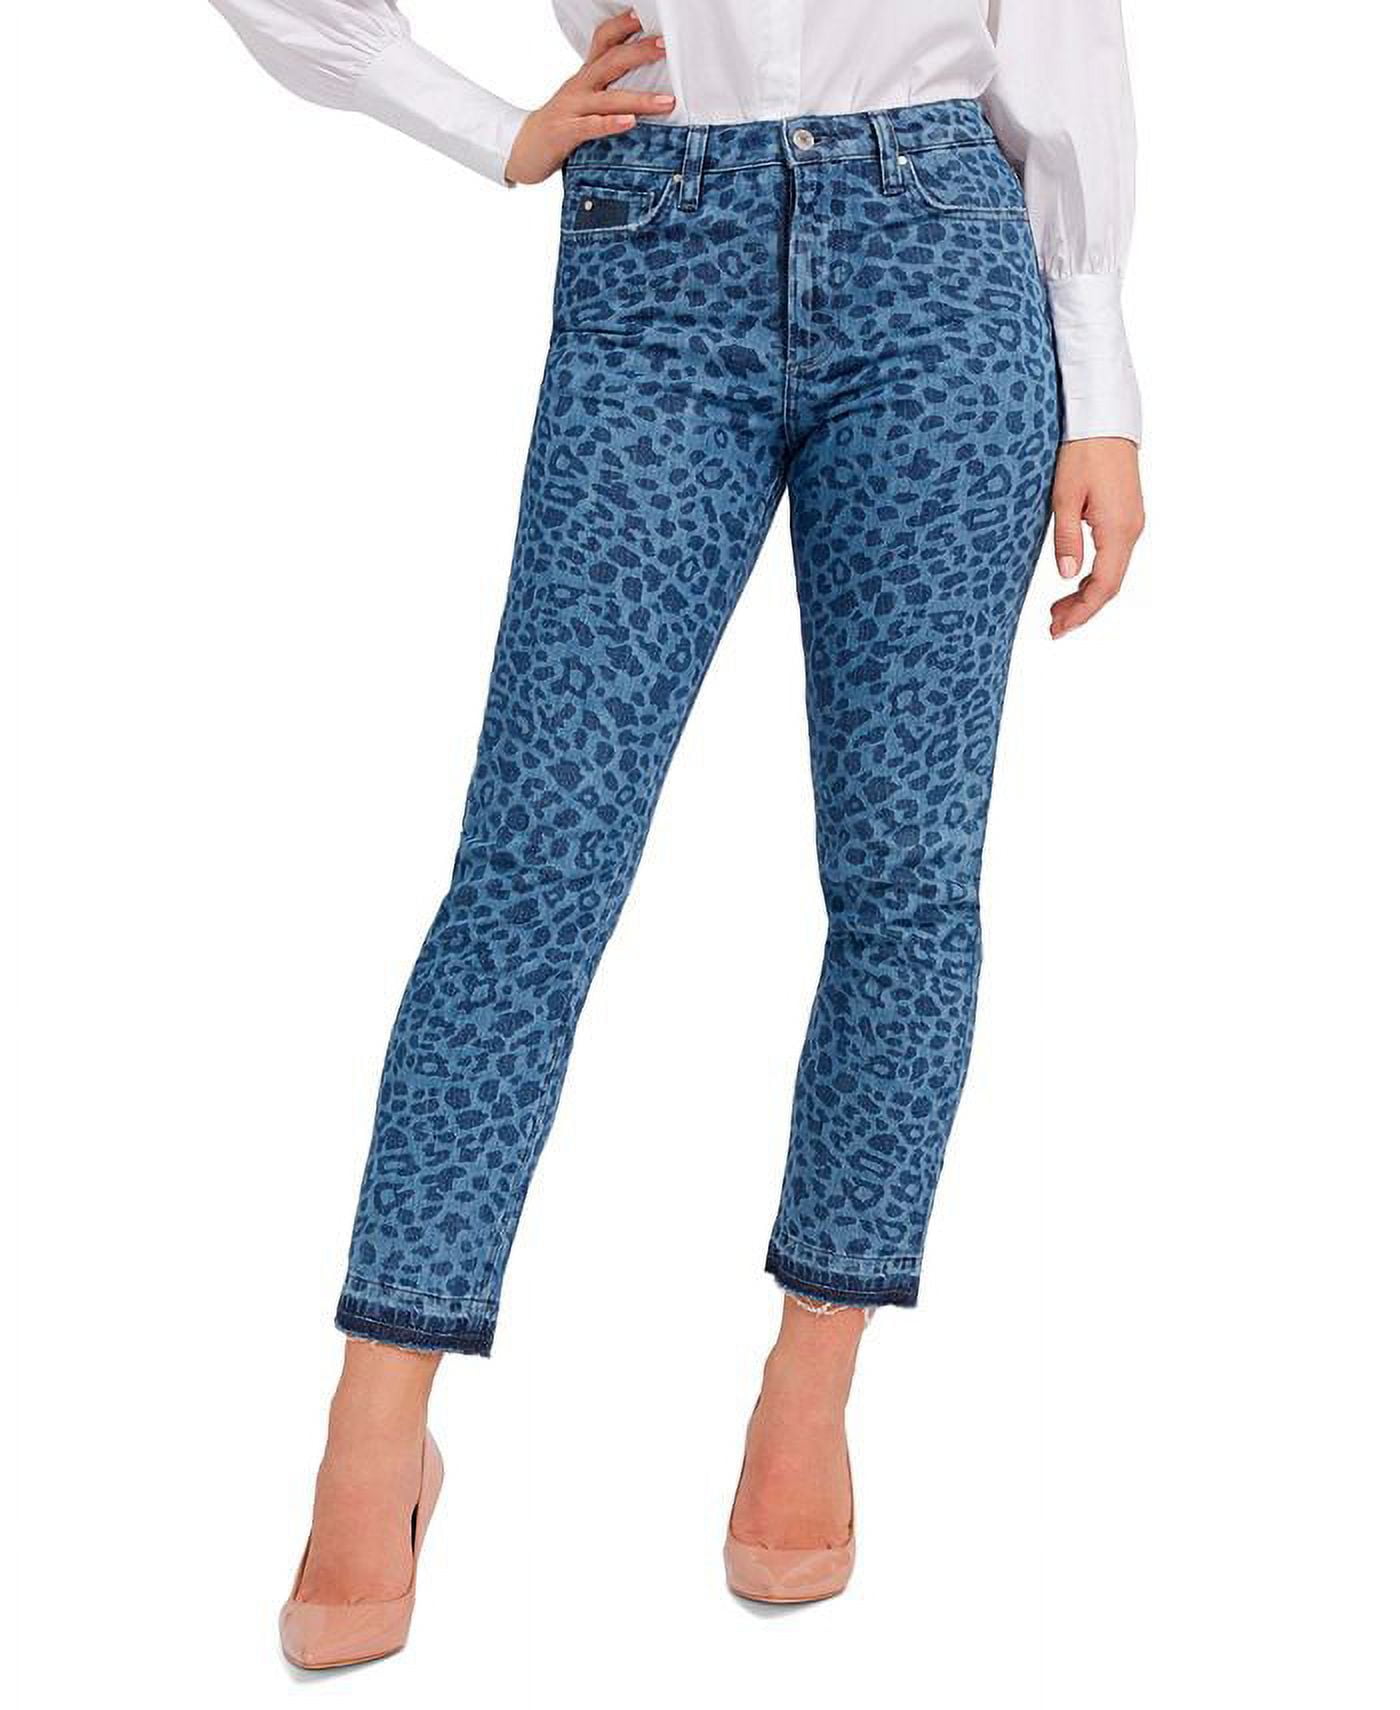 Discover more than 146 blue jeans with white spots